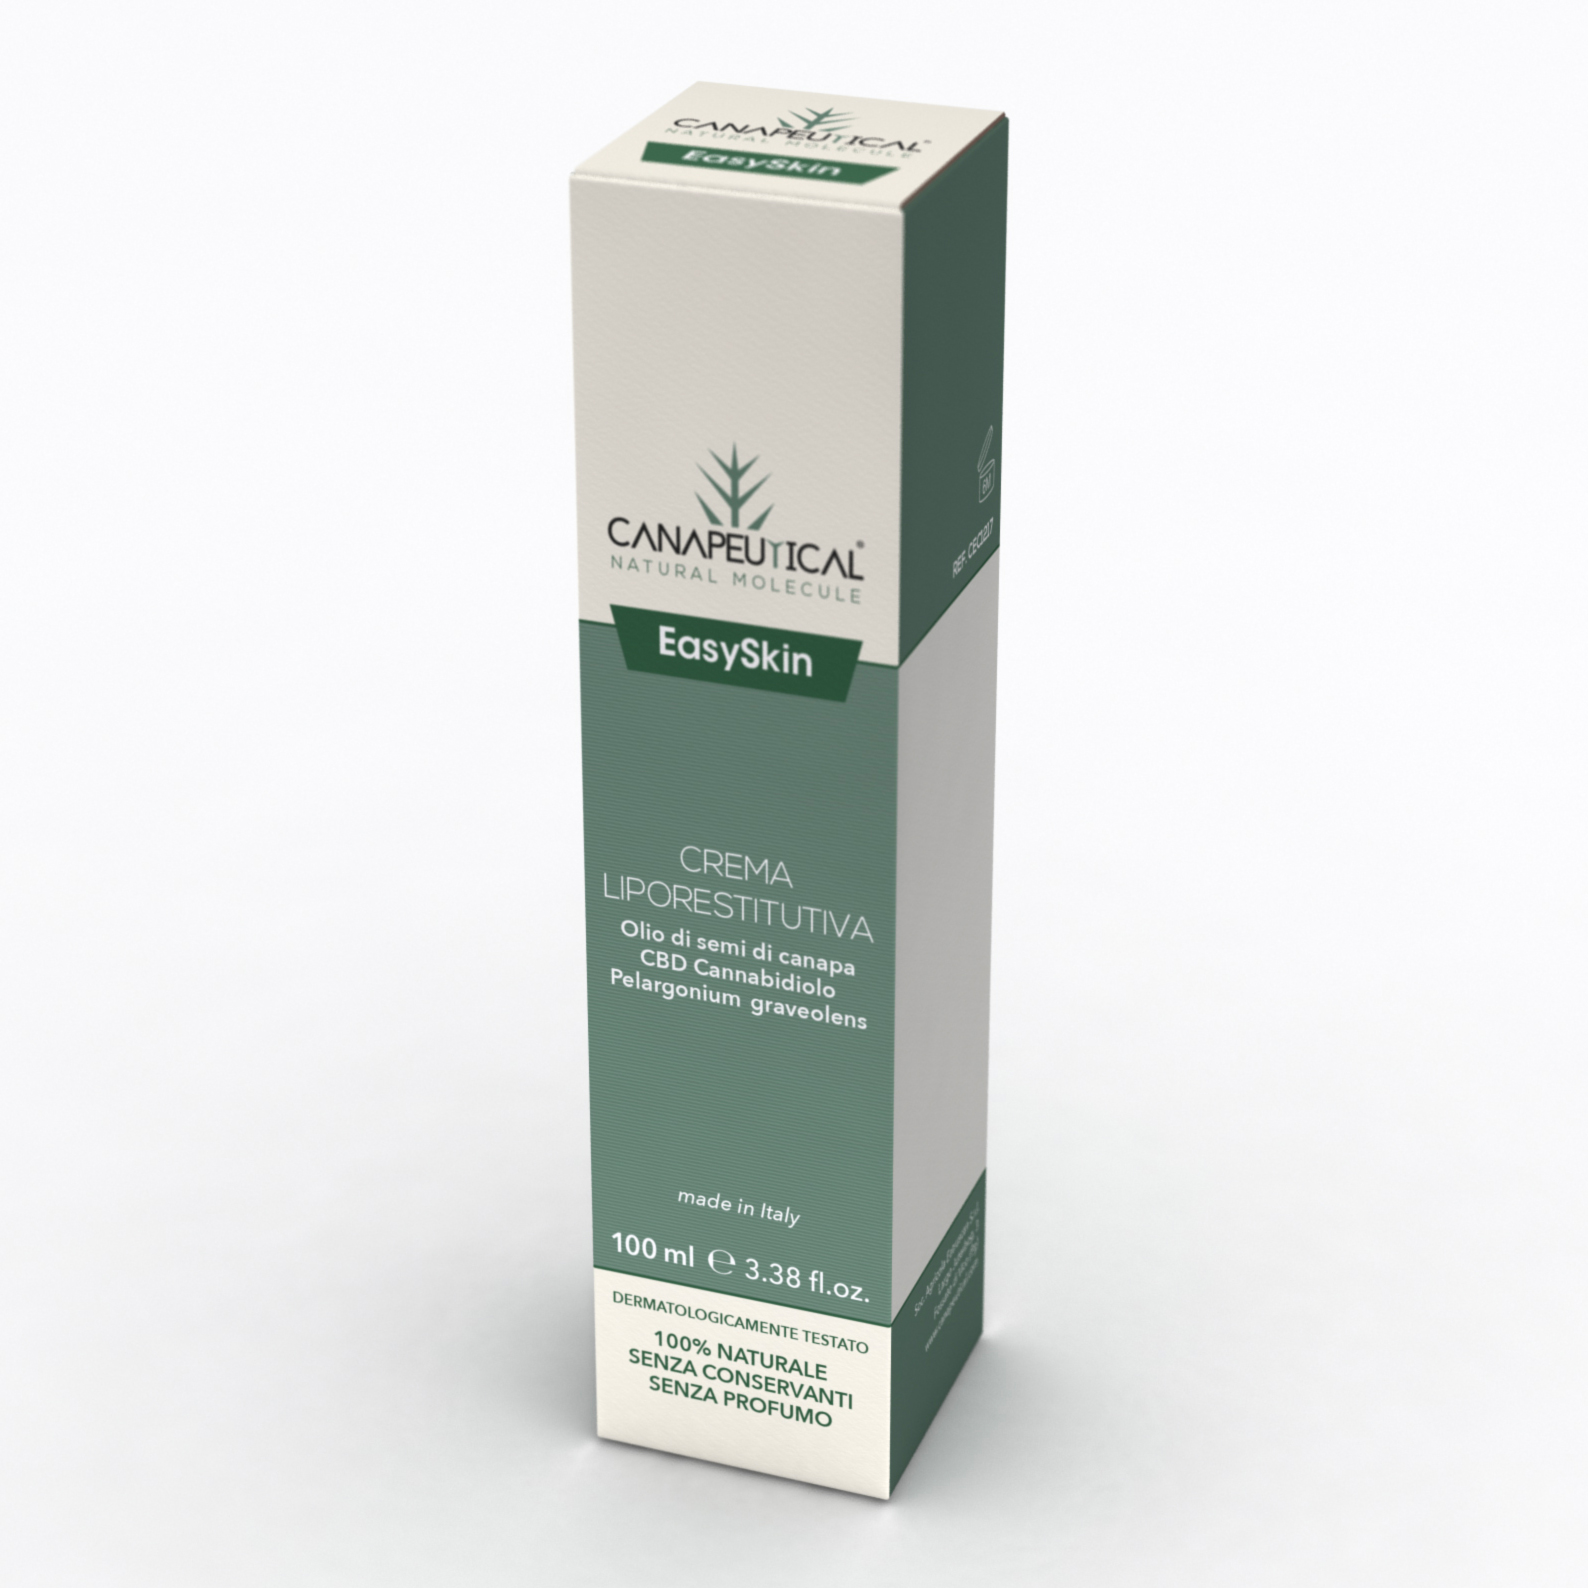 Image of Canapeutical Easy Skin 100g 974044796